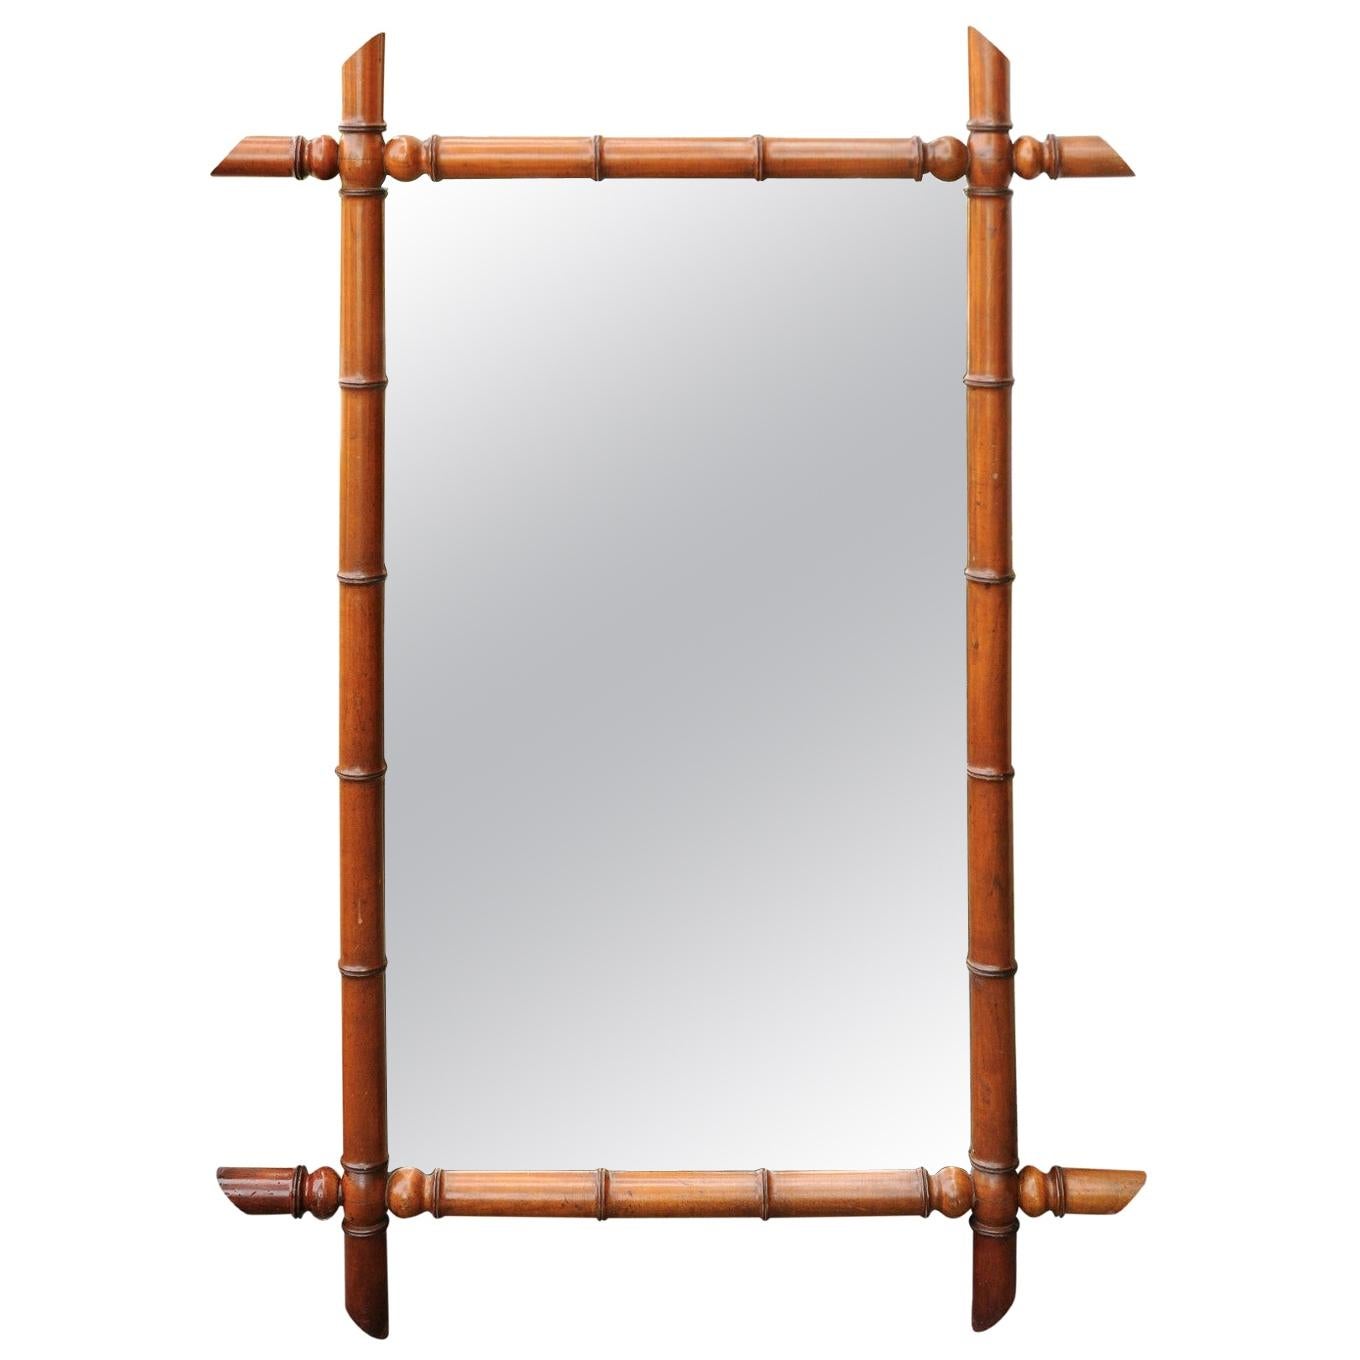 French Turn of the Century Faux Bamboo Mirror with Protruding Corners, 1900s